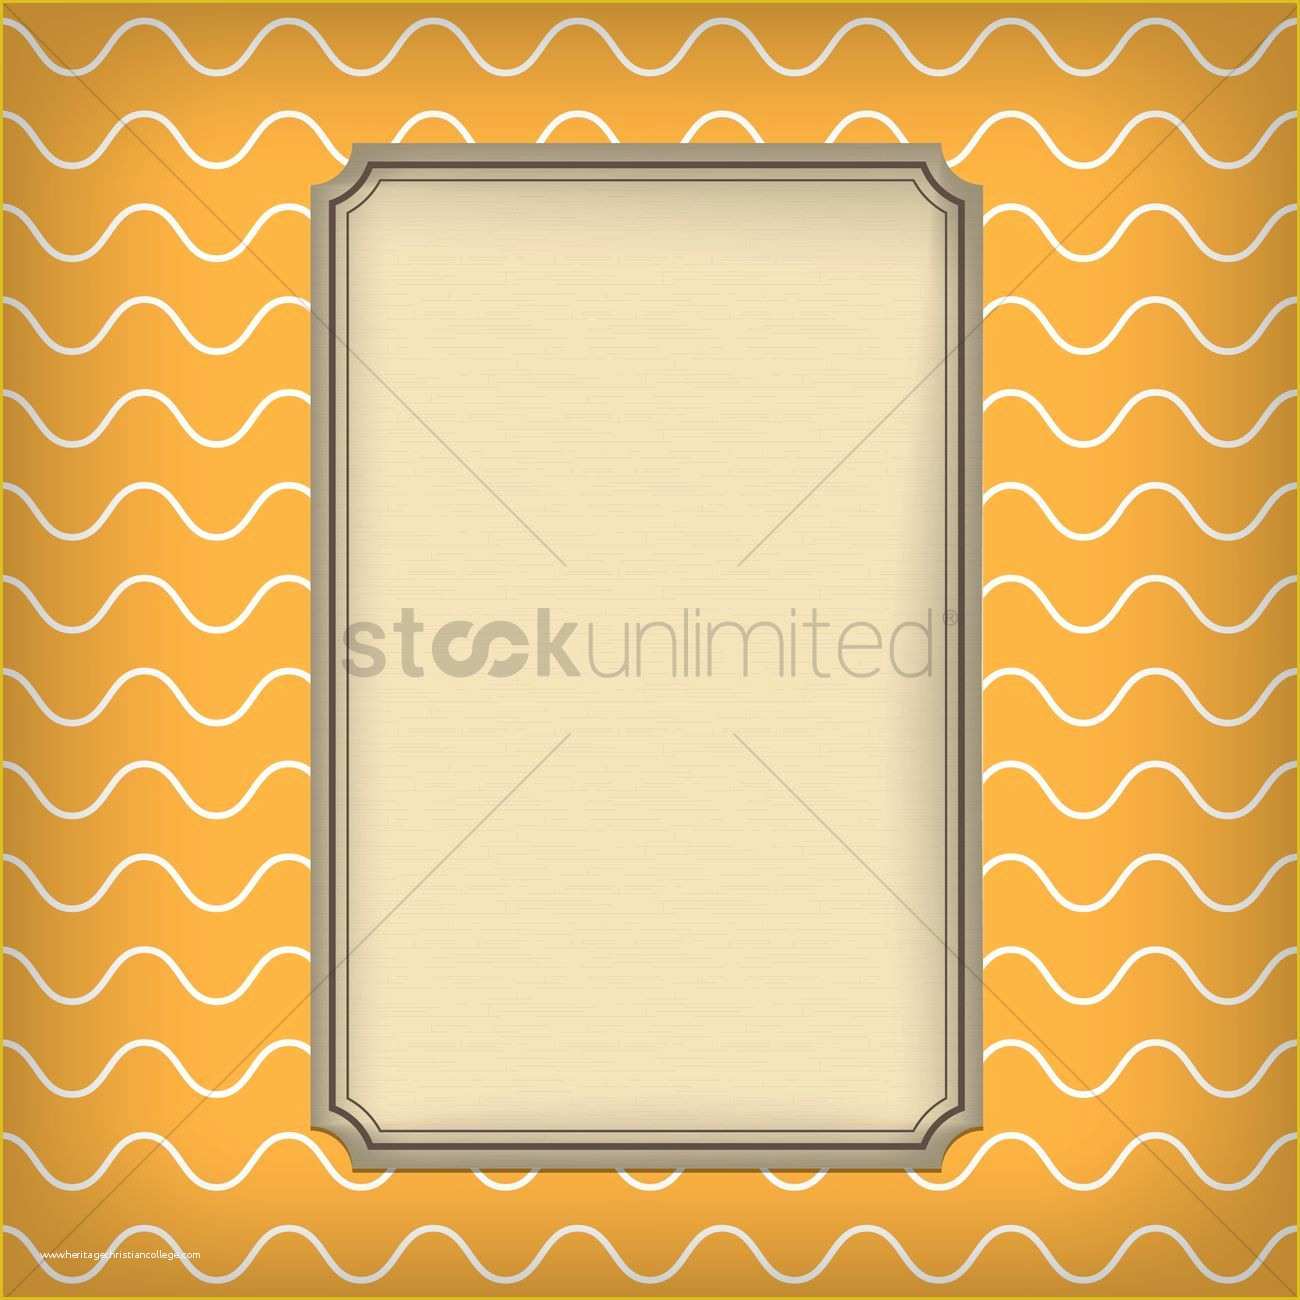 Free Greeting Card Templates Of Free Greeting Card Template Design Vector Image